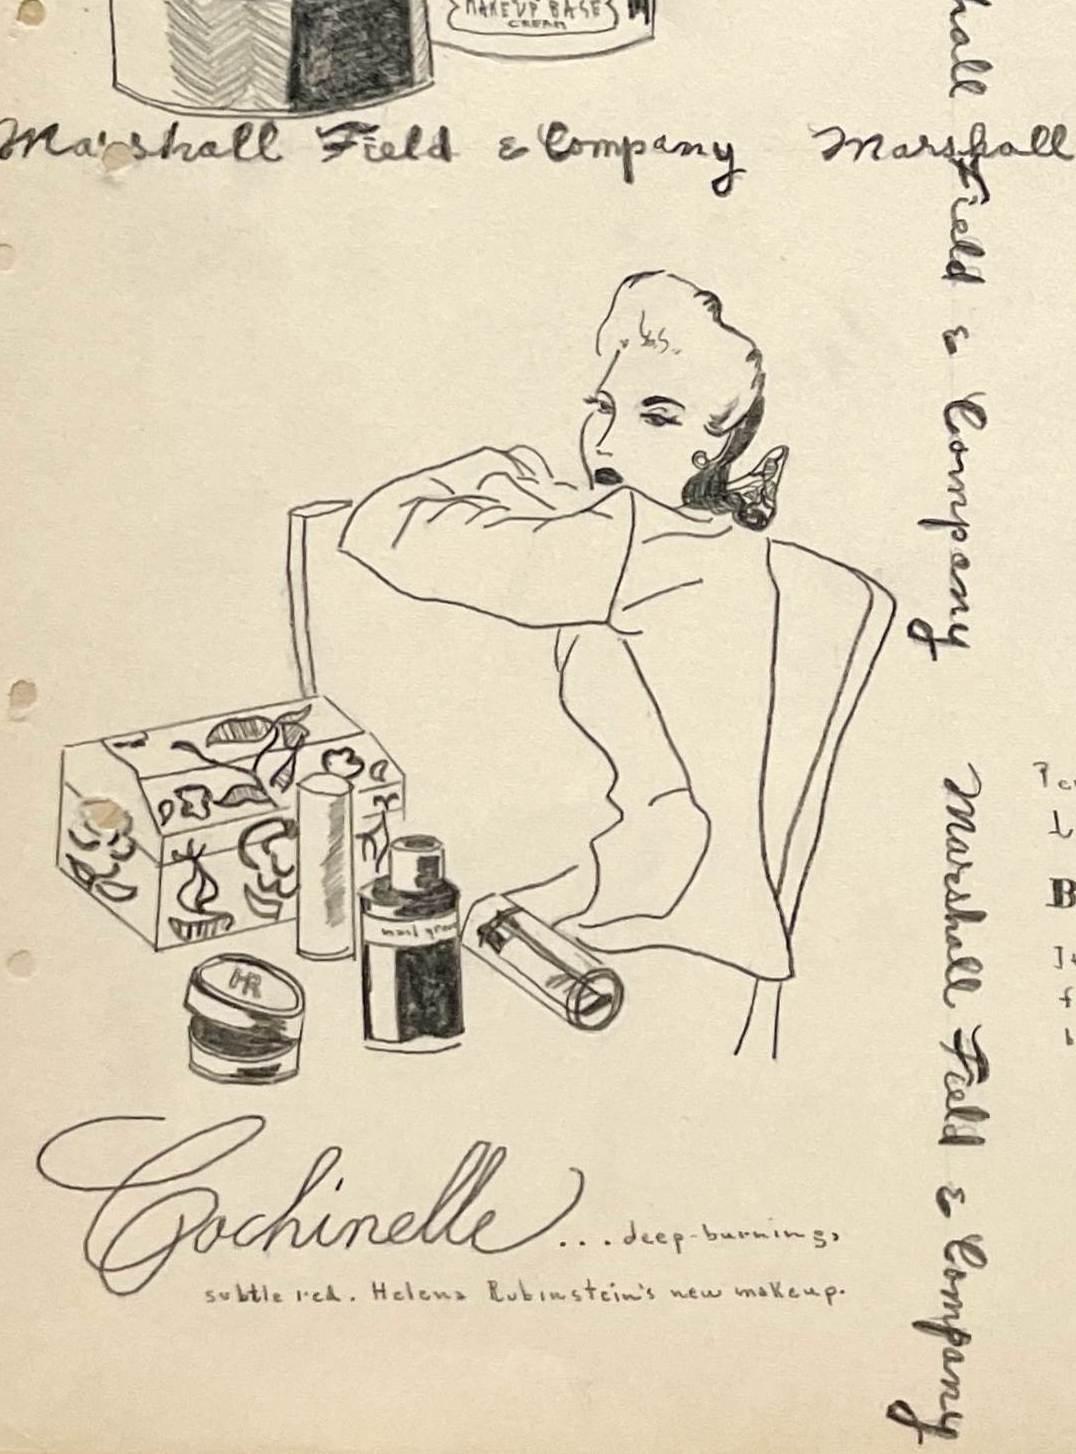 An early 1940s fashion study featuring and advertisement for Marshall Field & Company featuring cosmetics & perfume.  Provenance: Cornelia Steckl-Jurin, Founder of the Fashion Department at the School of the Art Institute of Chicago. Archivally